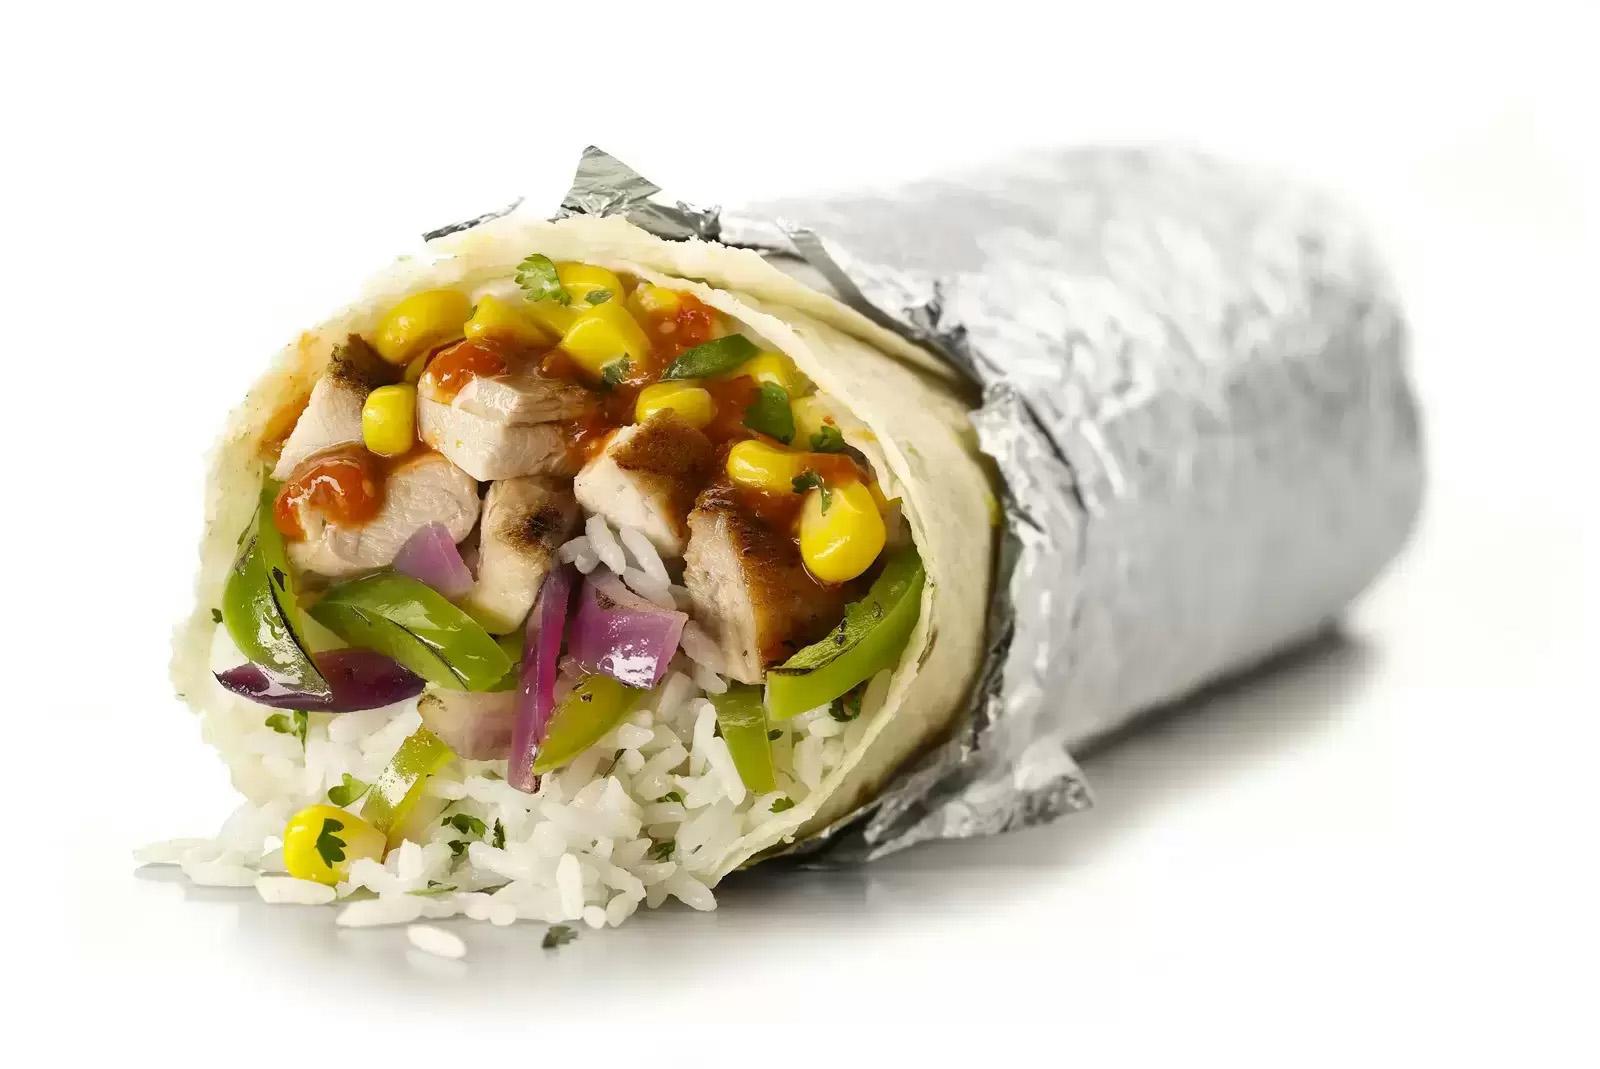 Chipotle Buy One Get One Free for DashPass Members